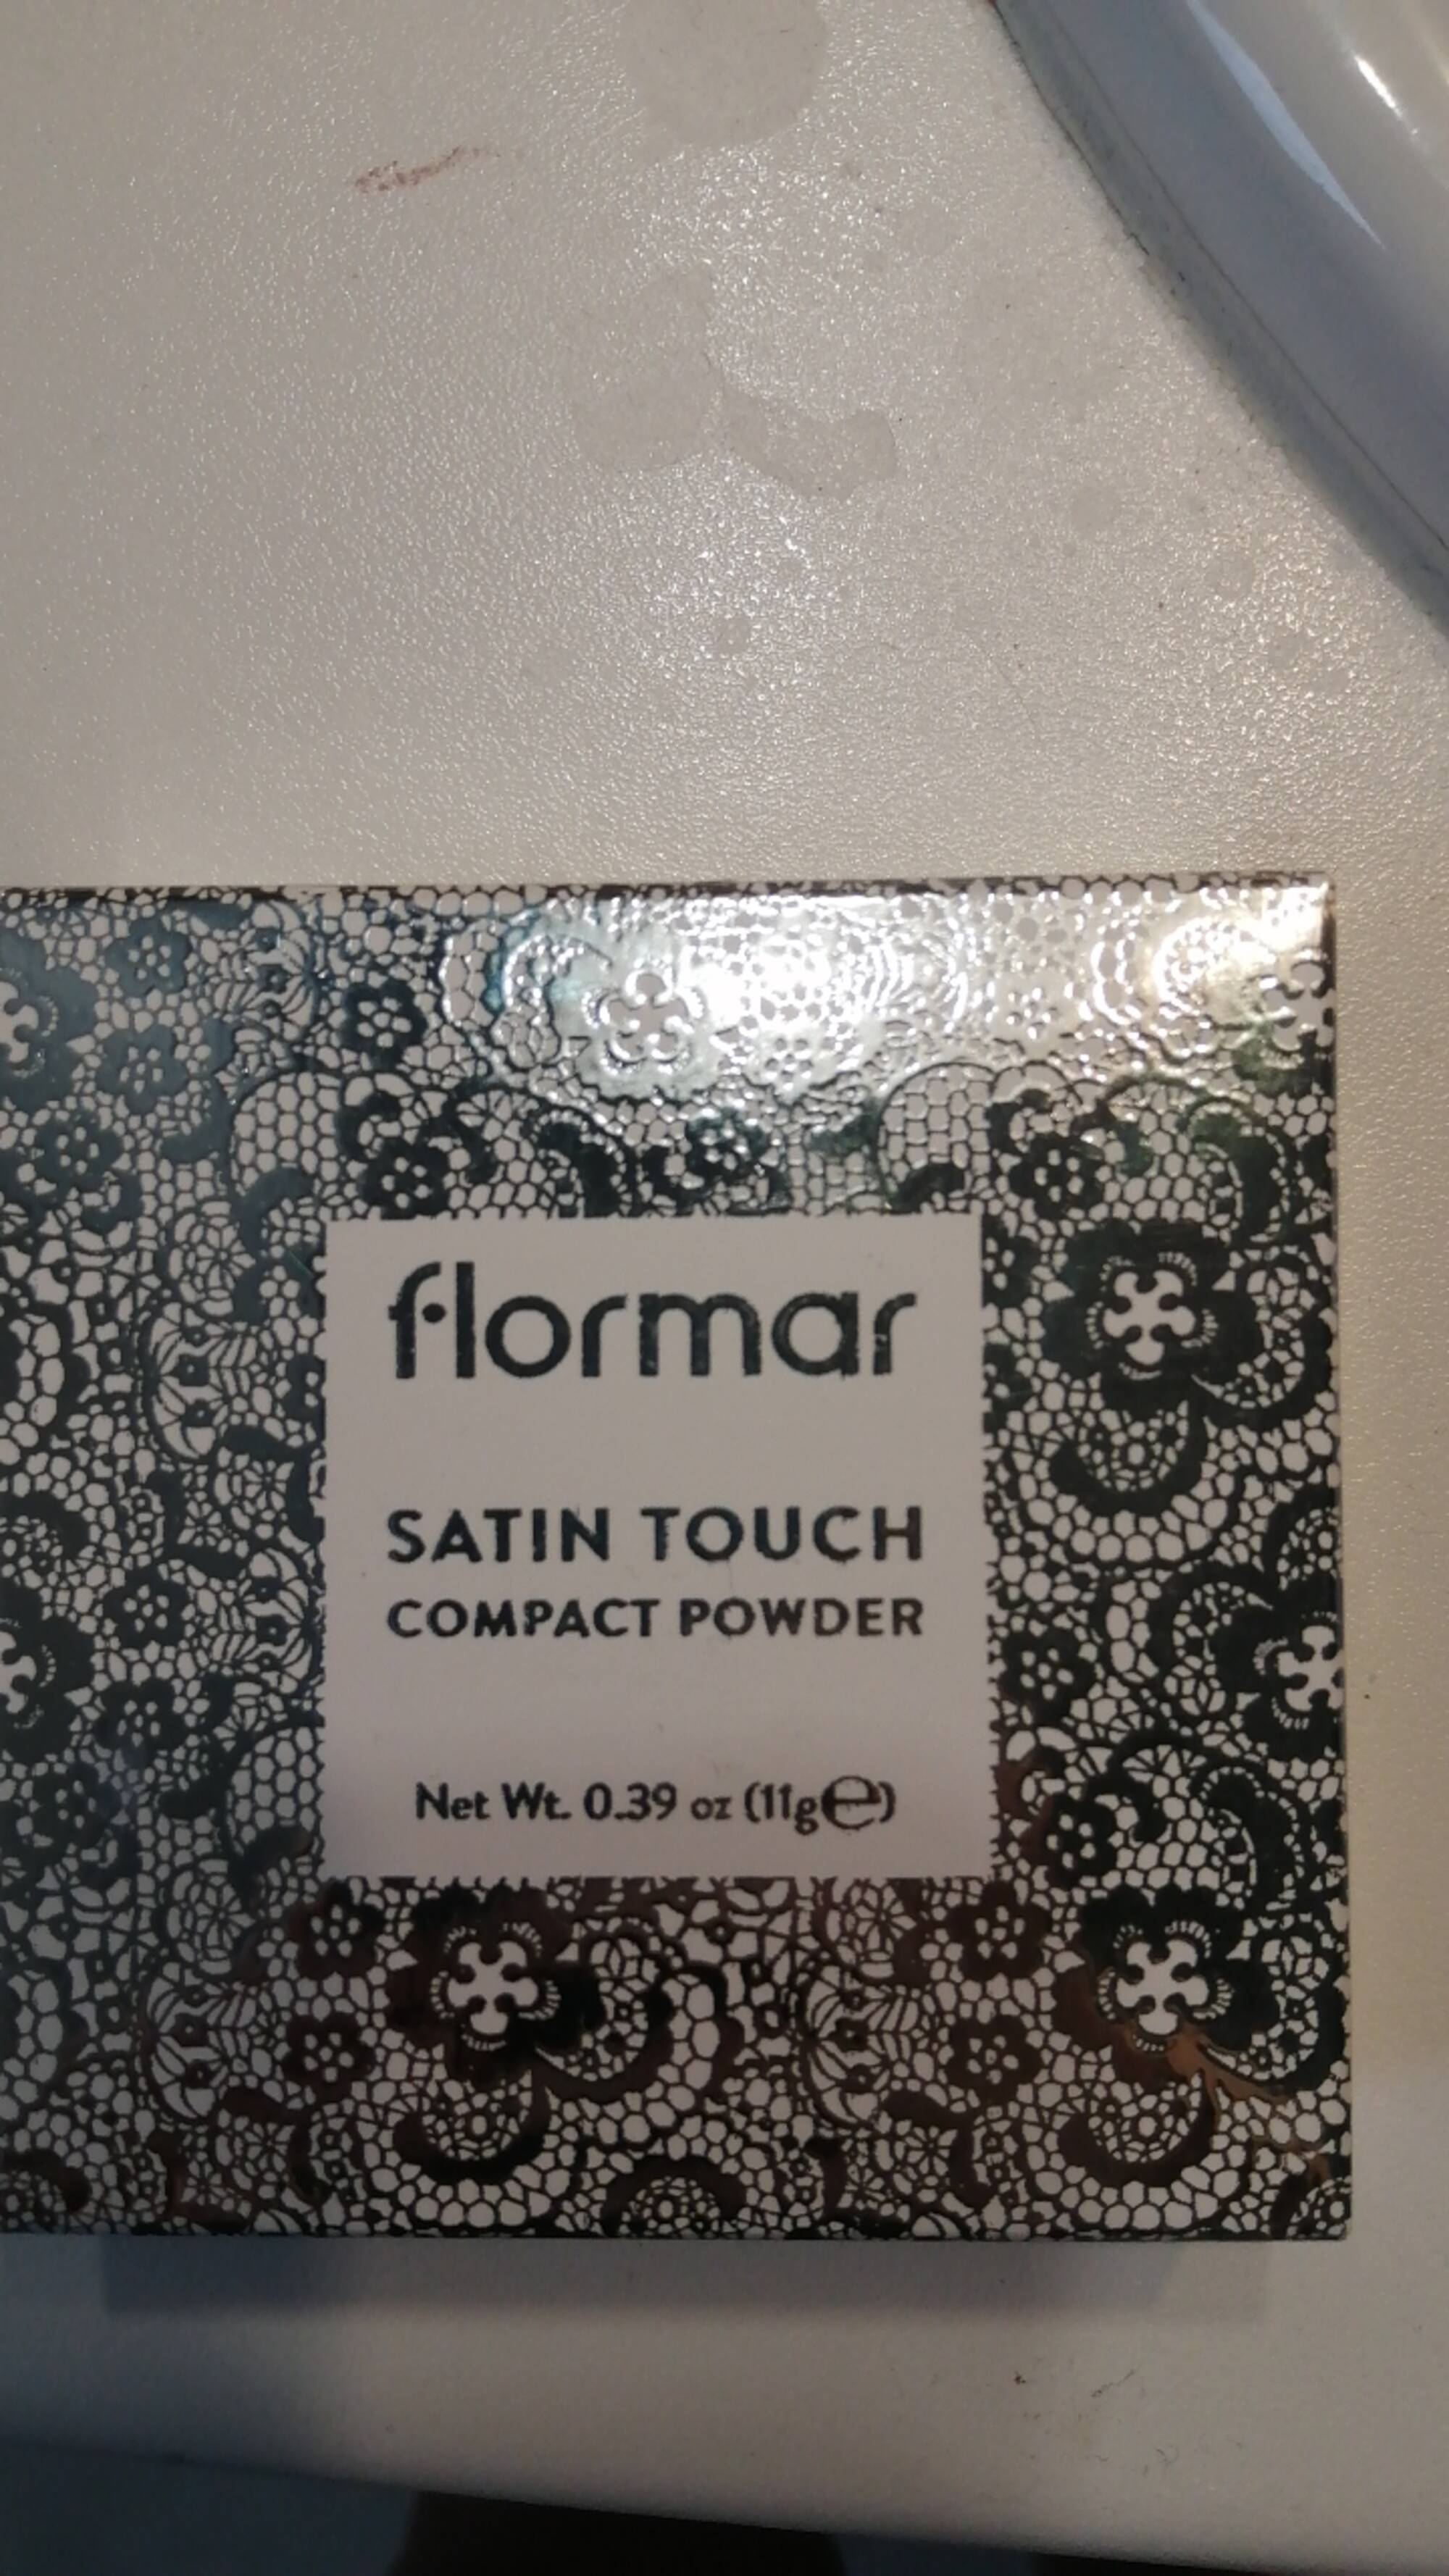 FLORMAR - Satin touch compact powder